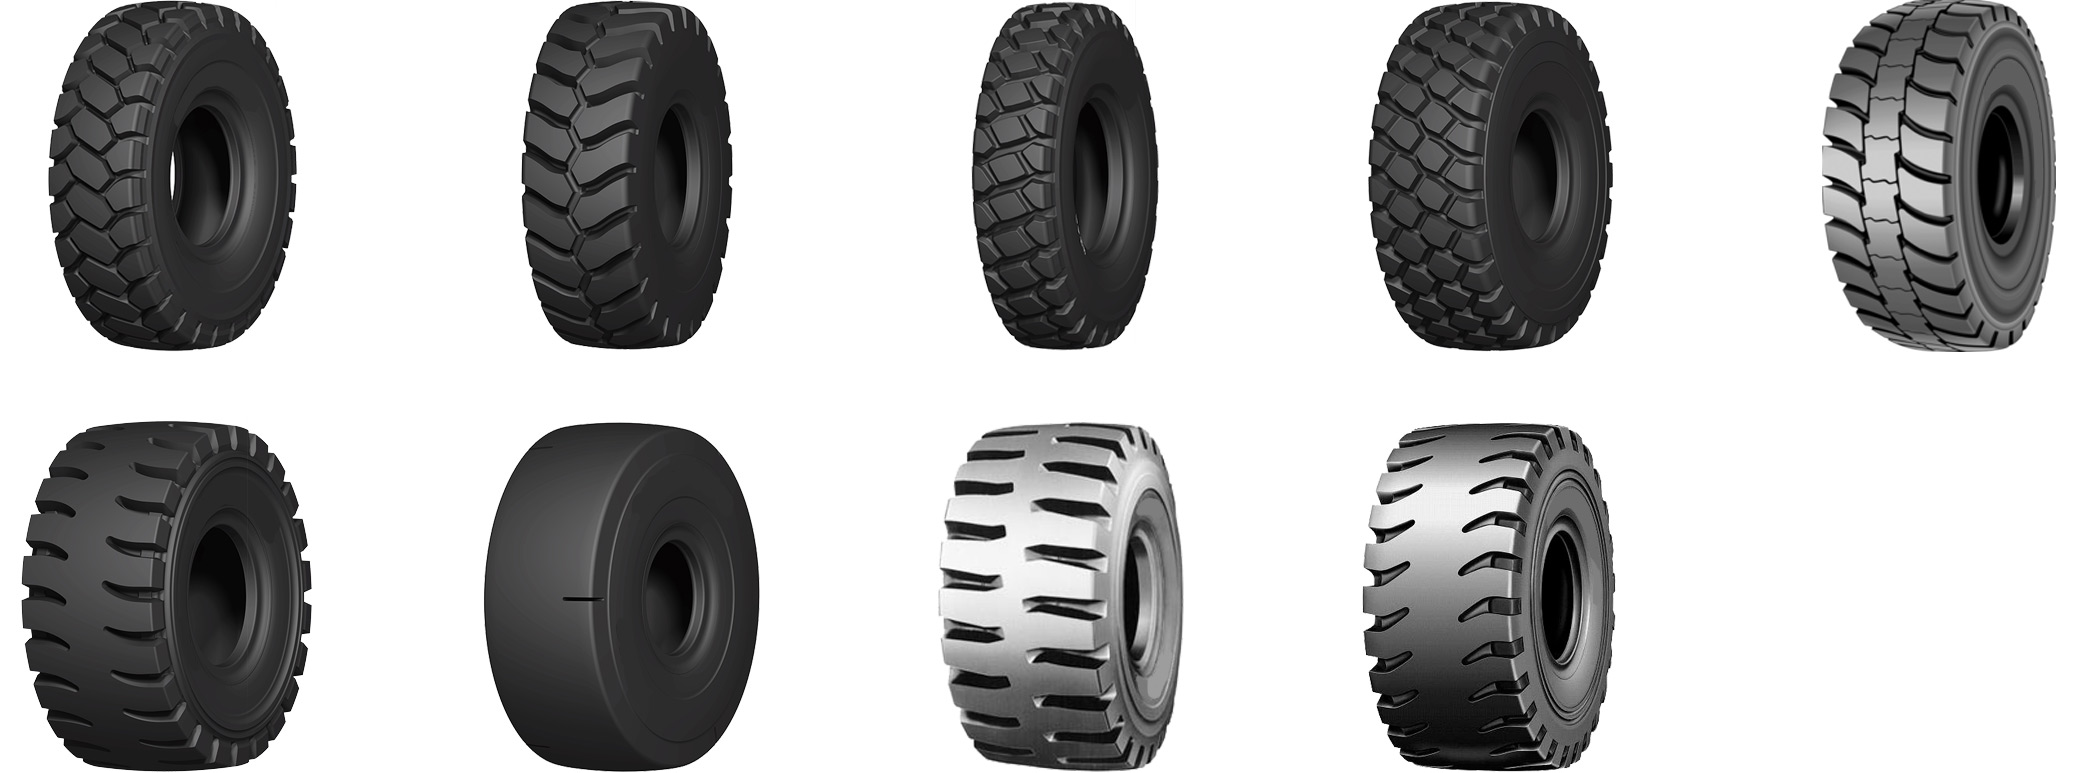 Tyres supply